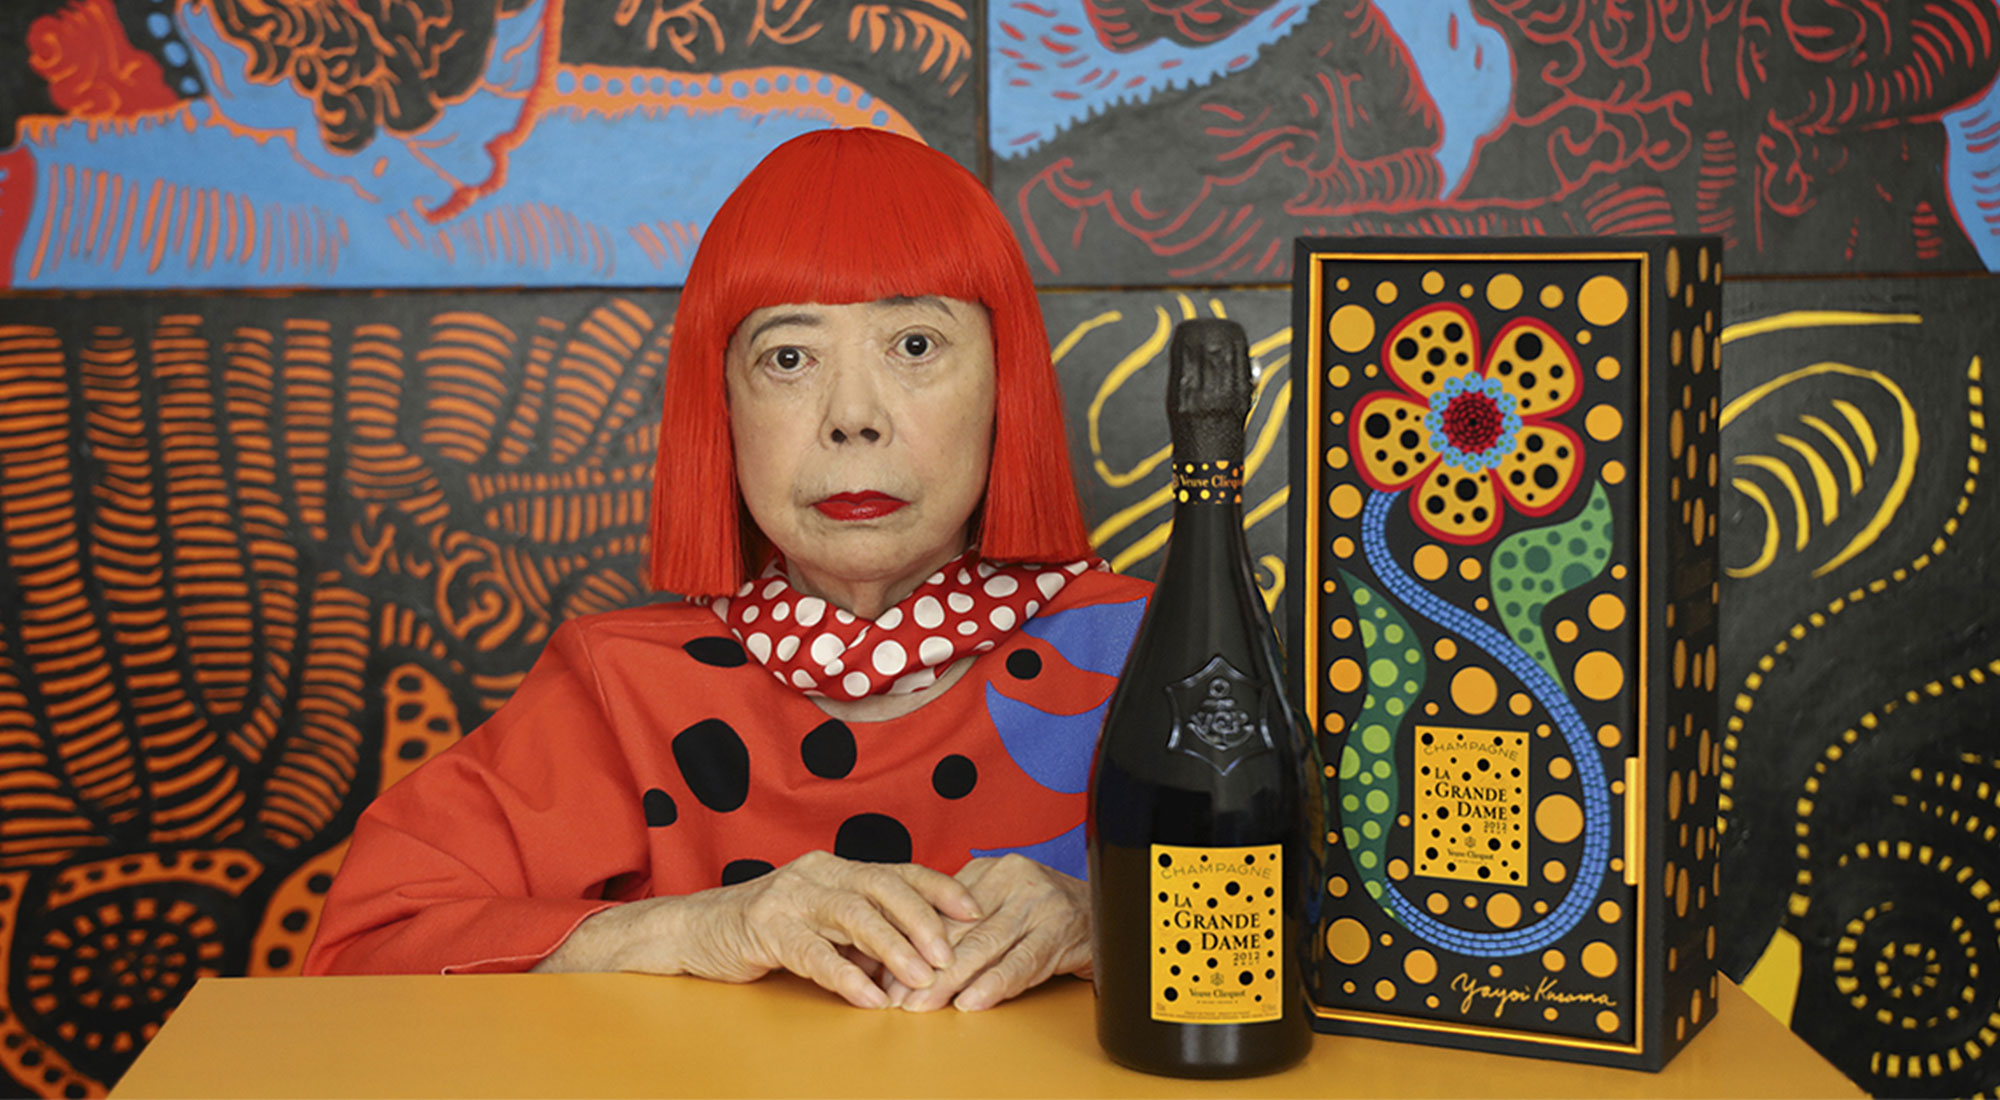 VEUVE CLICQUOT  A miracle collaboration bottle VEUVE CLICQUOT LA GRANDE  DAME 2012 x YAYOI KUSAMA with Yayoi Kusama, the world's most famous and  influential contemporary art master, will be introduced.